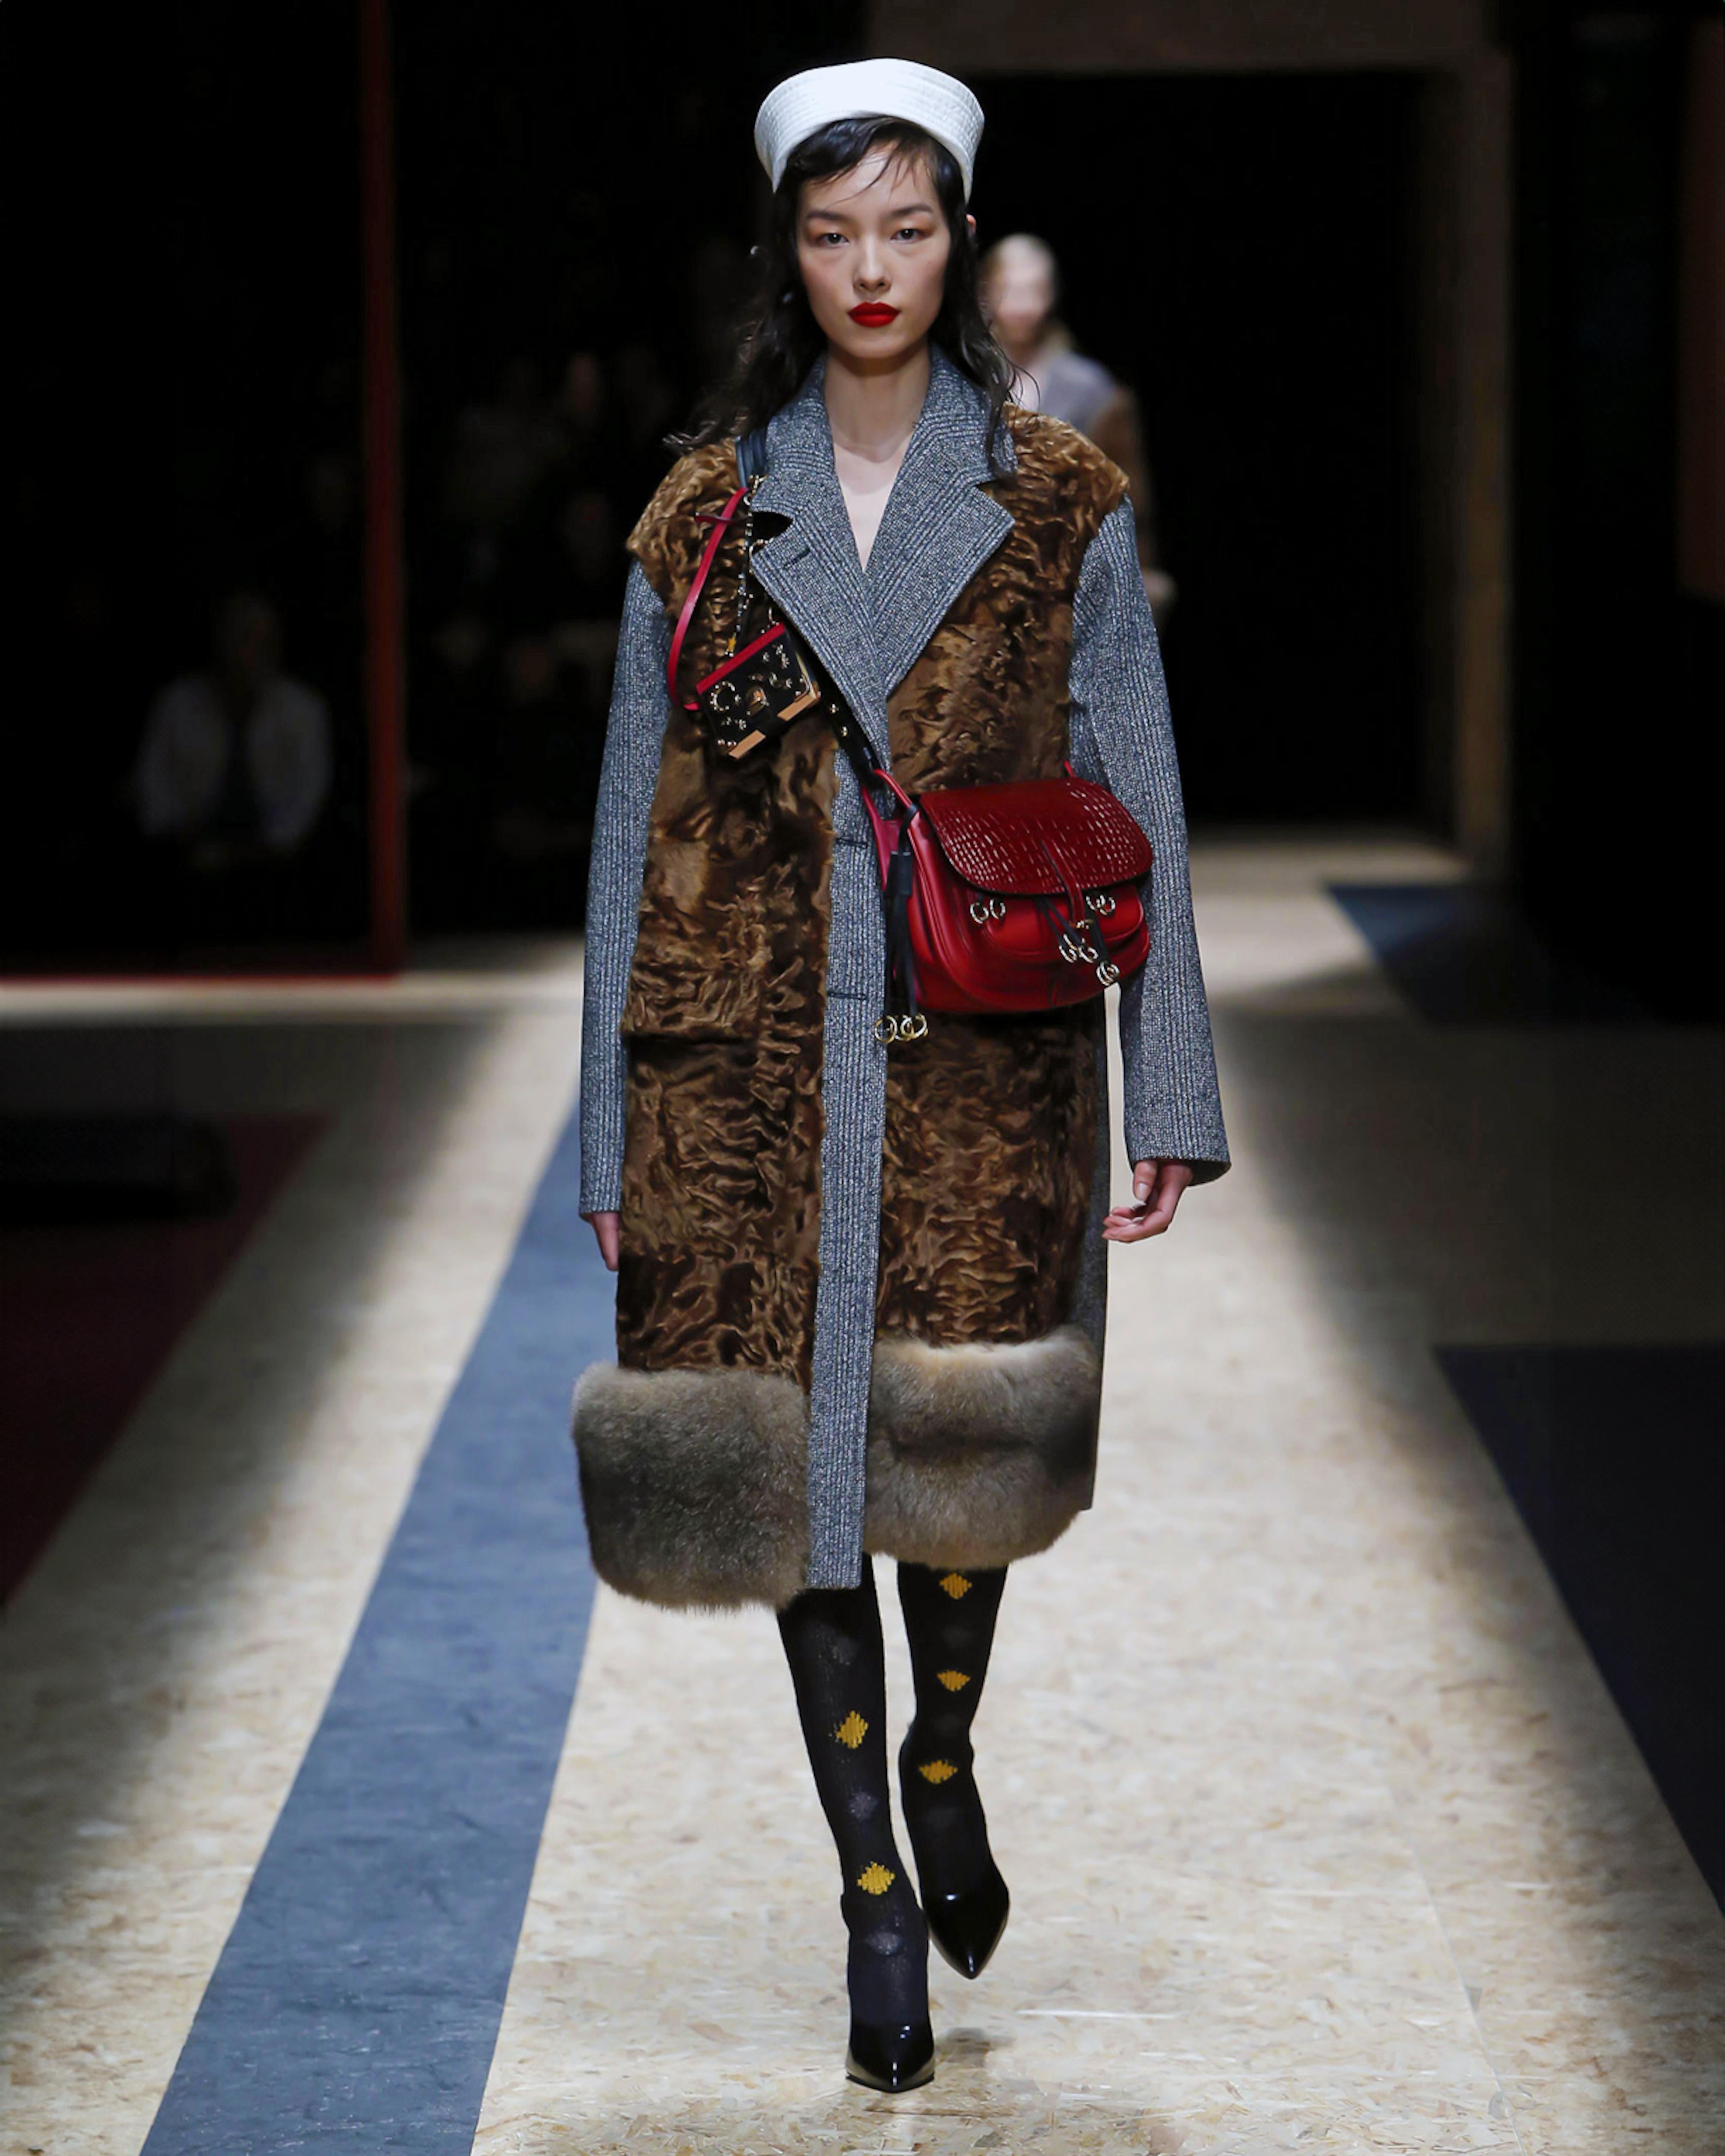 Prada by Miuccia Prada Grey and Brown Wool, Lamb and Possum Fur Coat, FW 2016 In Excellent Condition For Sale In London, GB